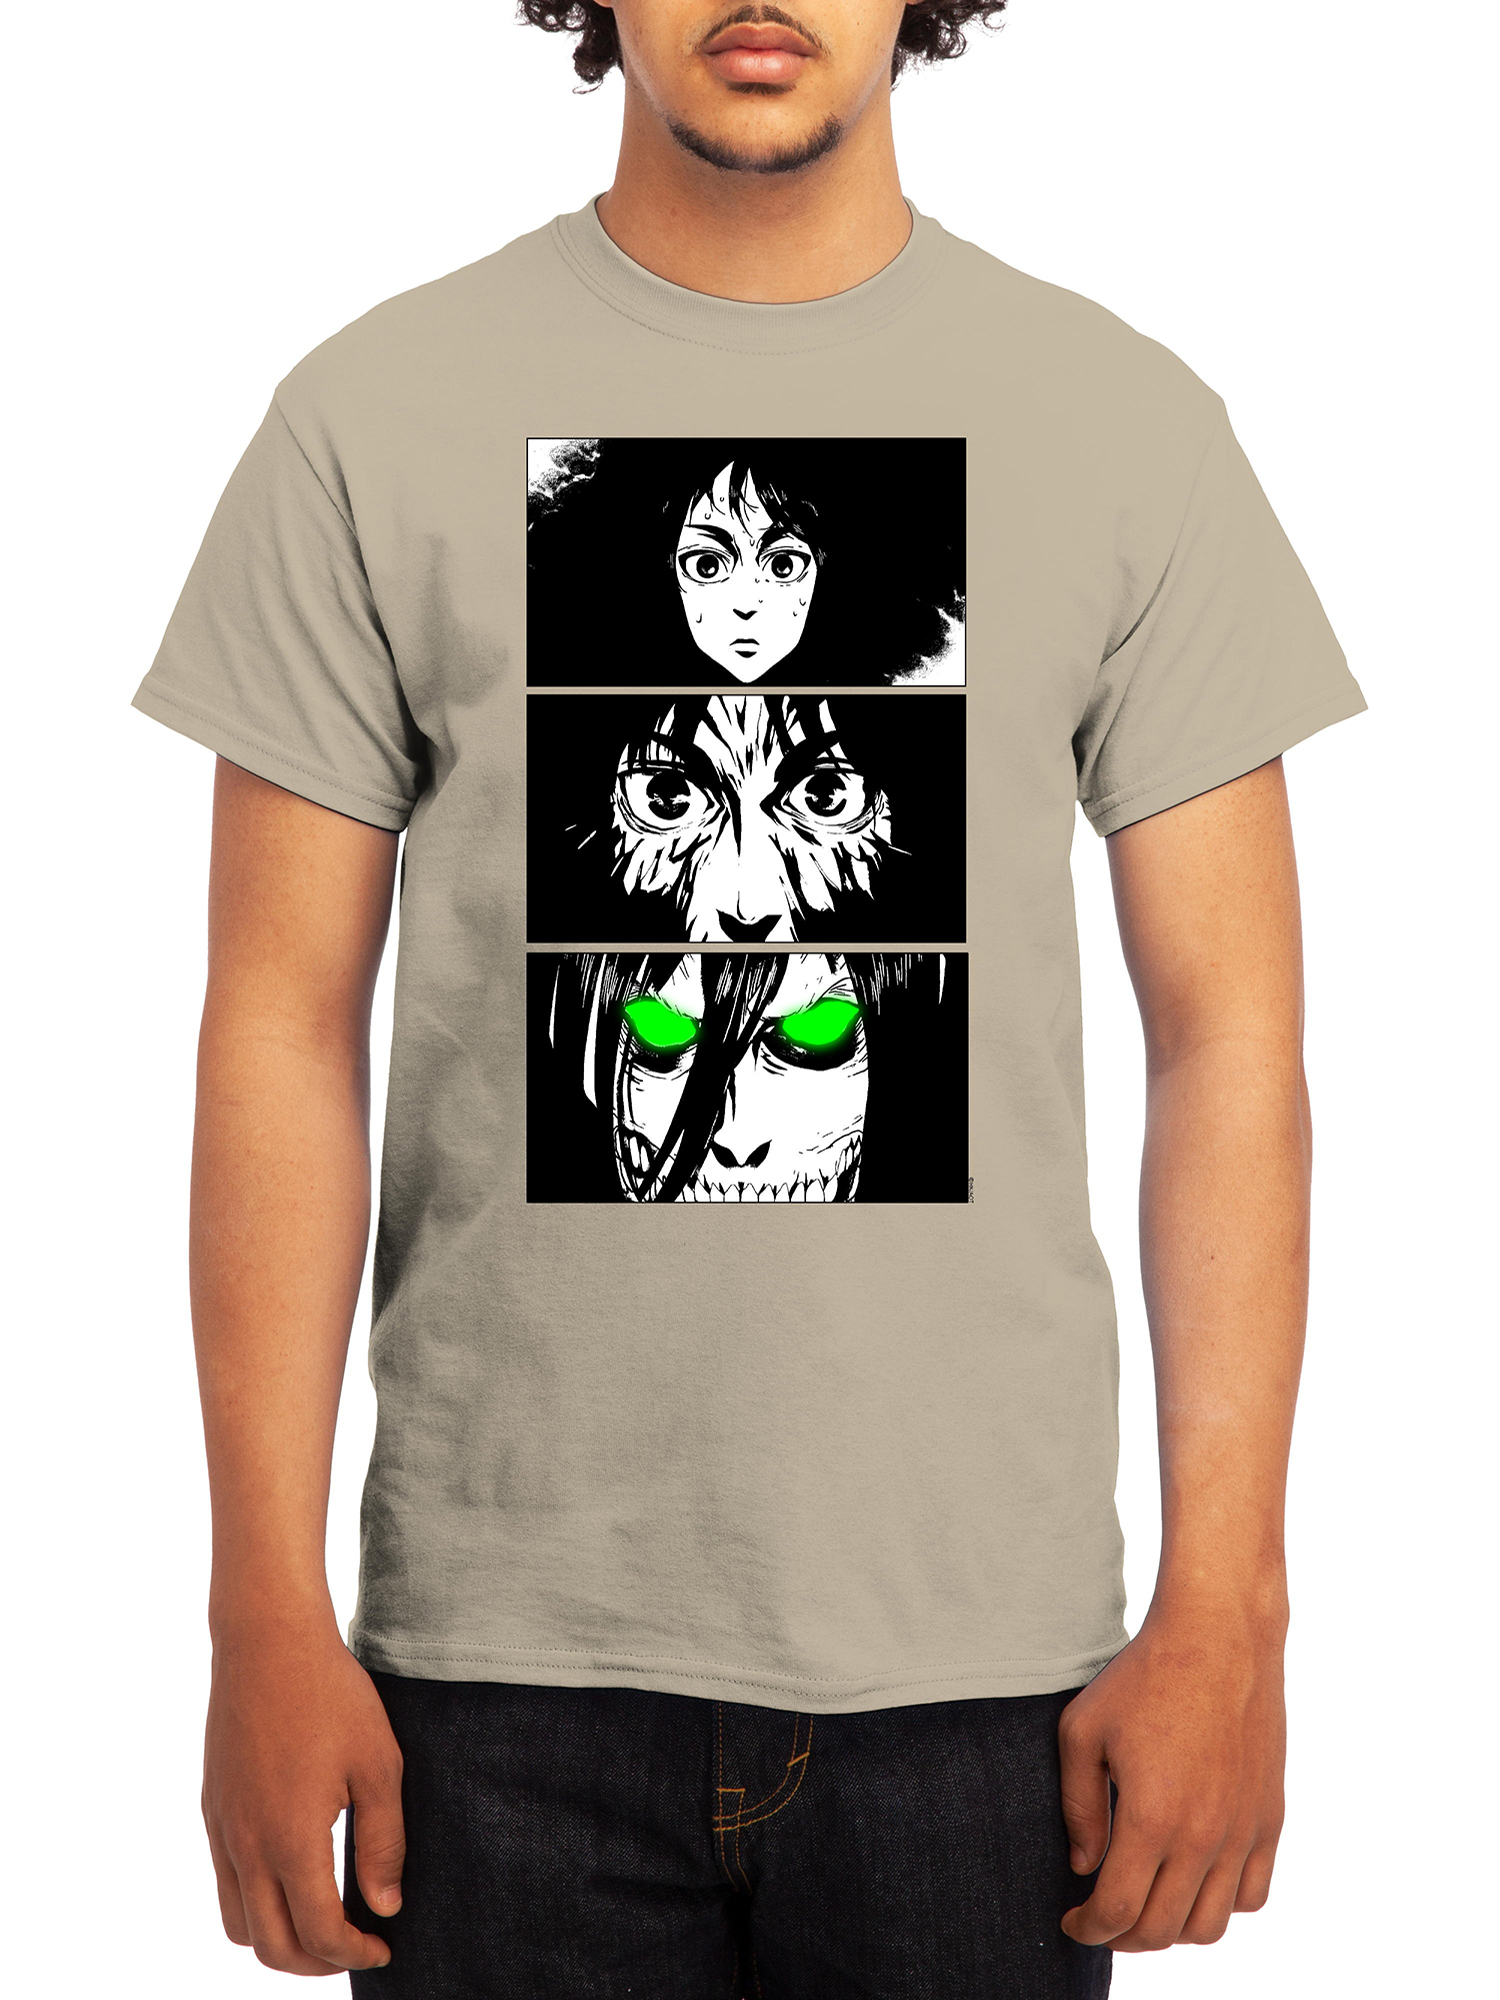 Attack On Titan Men's Short Sleeve Graphic Tee - image 1 of 2